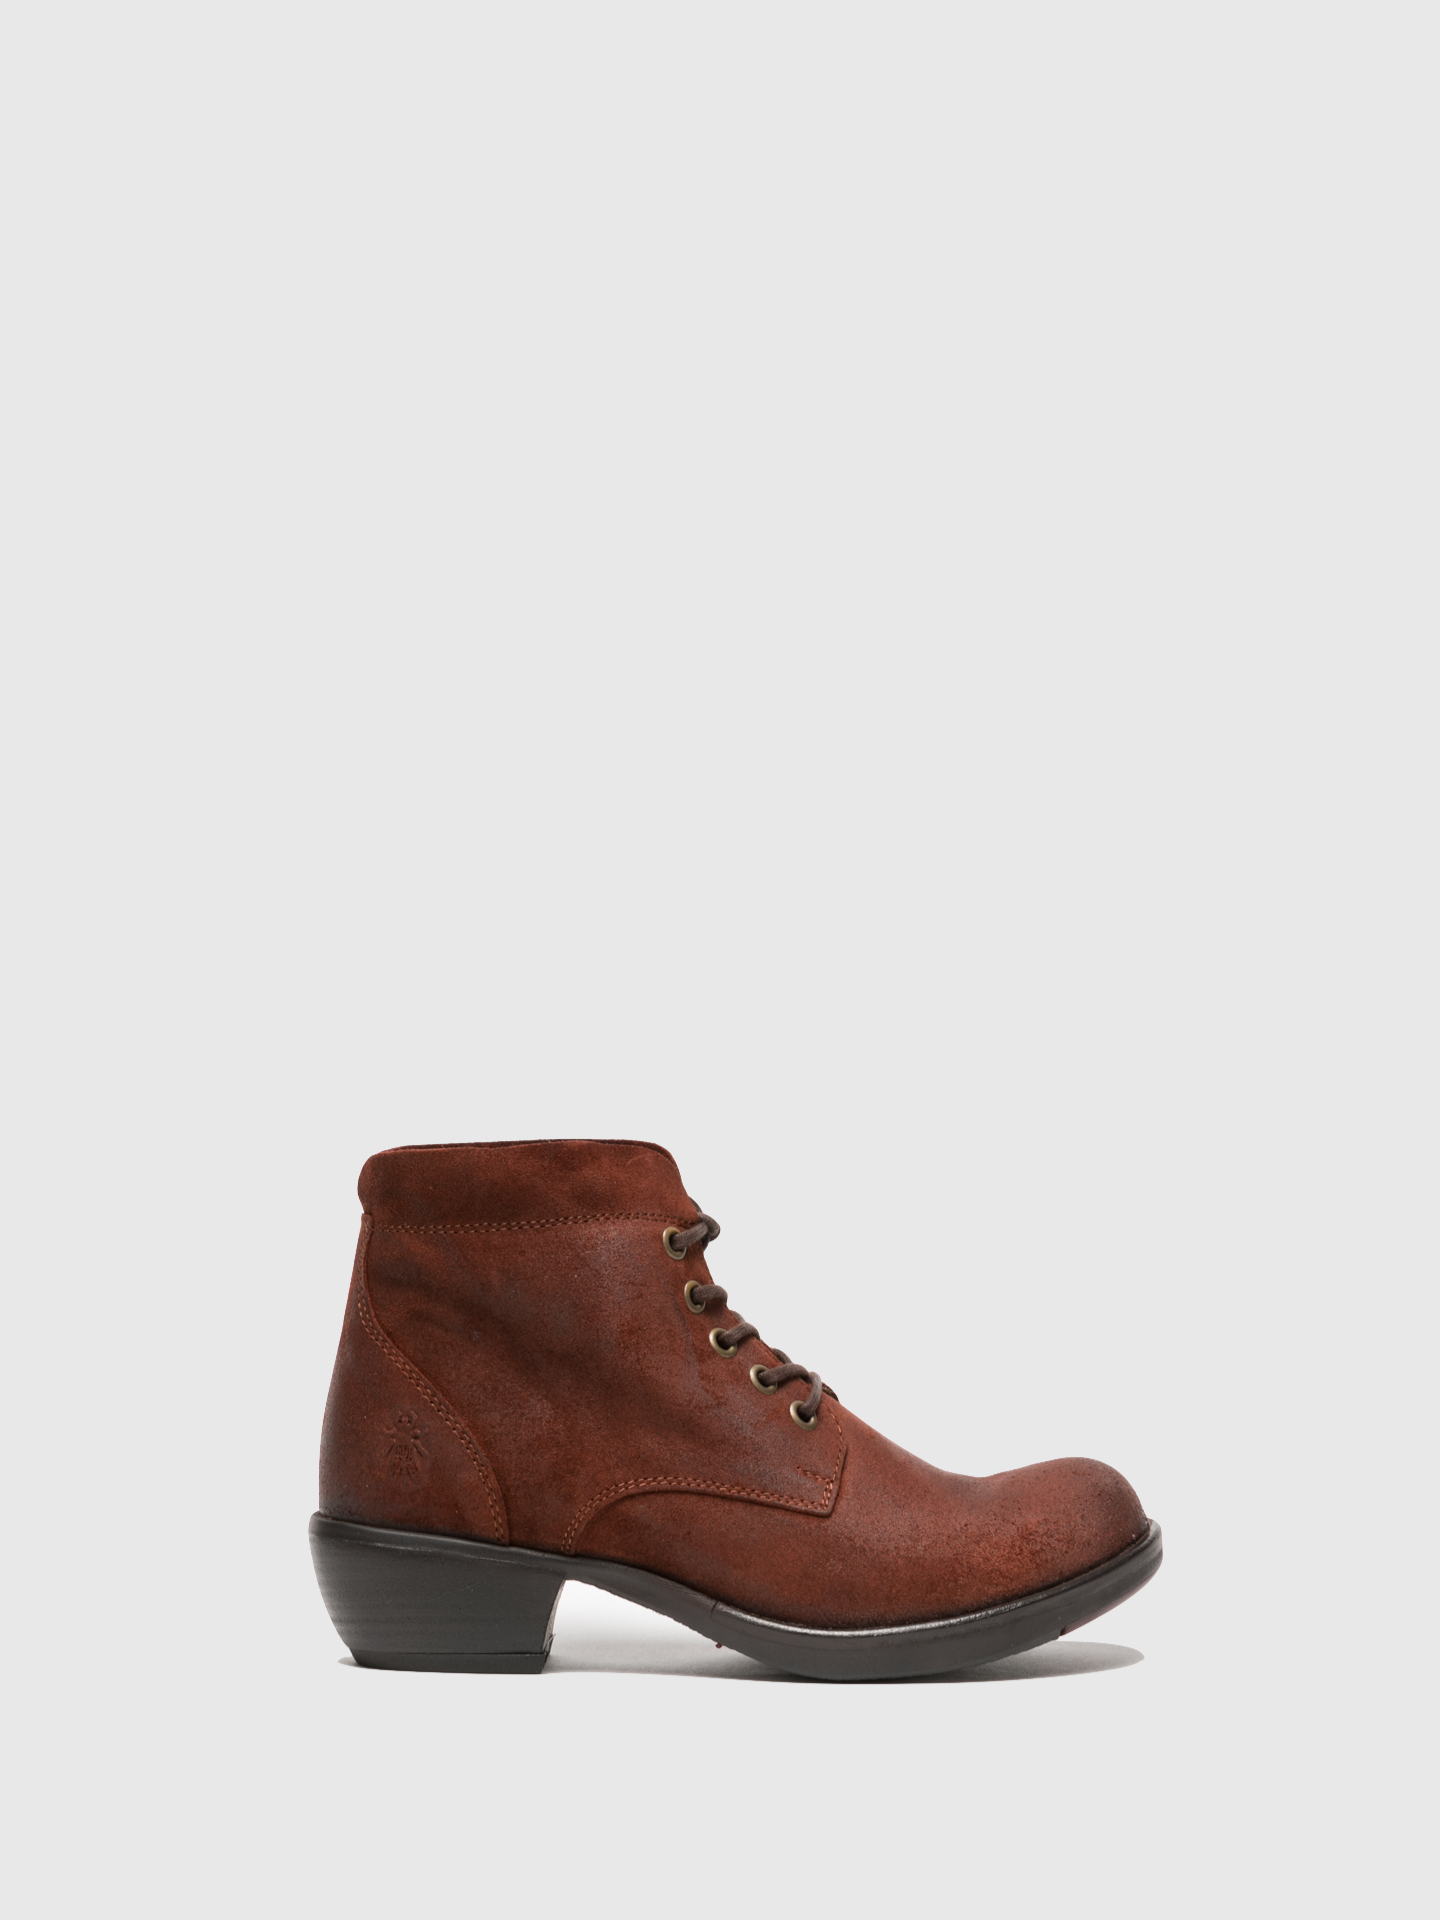 Fly London Red Lace-up Ankle Boots